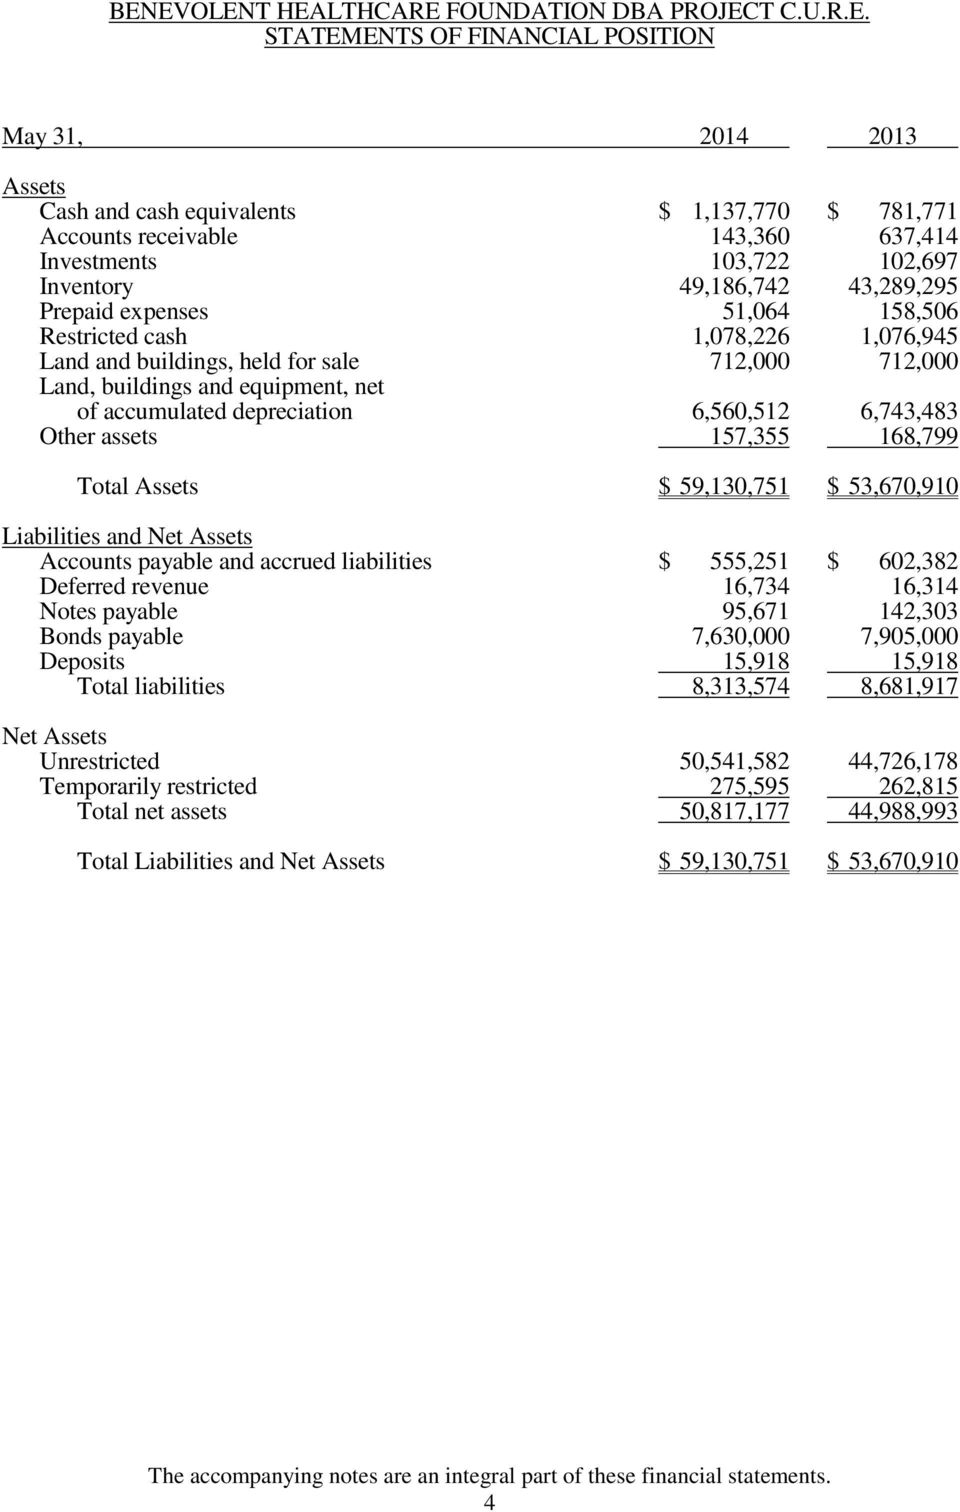 6,560,512 6,743,483 Other assets 157,355 168,799 Total Assets $ 59,130,751 $ 53,670,910 Liabilities and Net Assets Accounts payable and accrued liabilities $ 555,251 $ 602,382 Deferred revenue 16,734